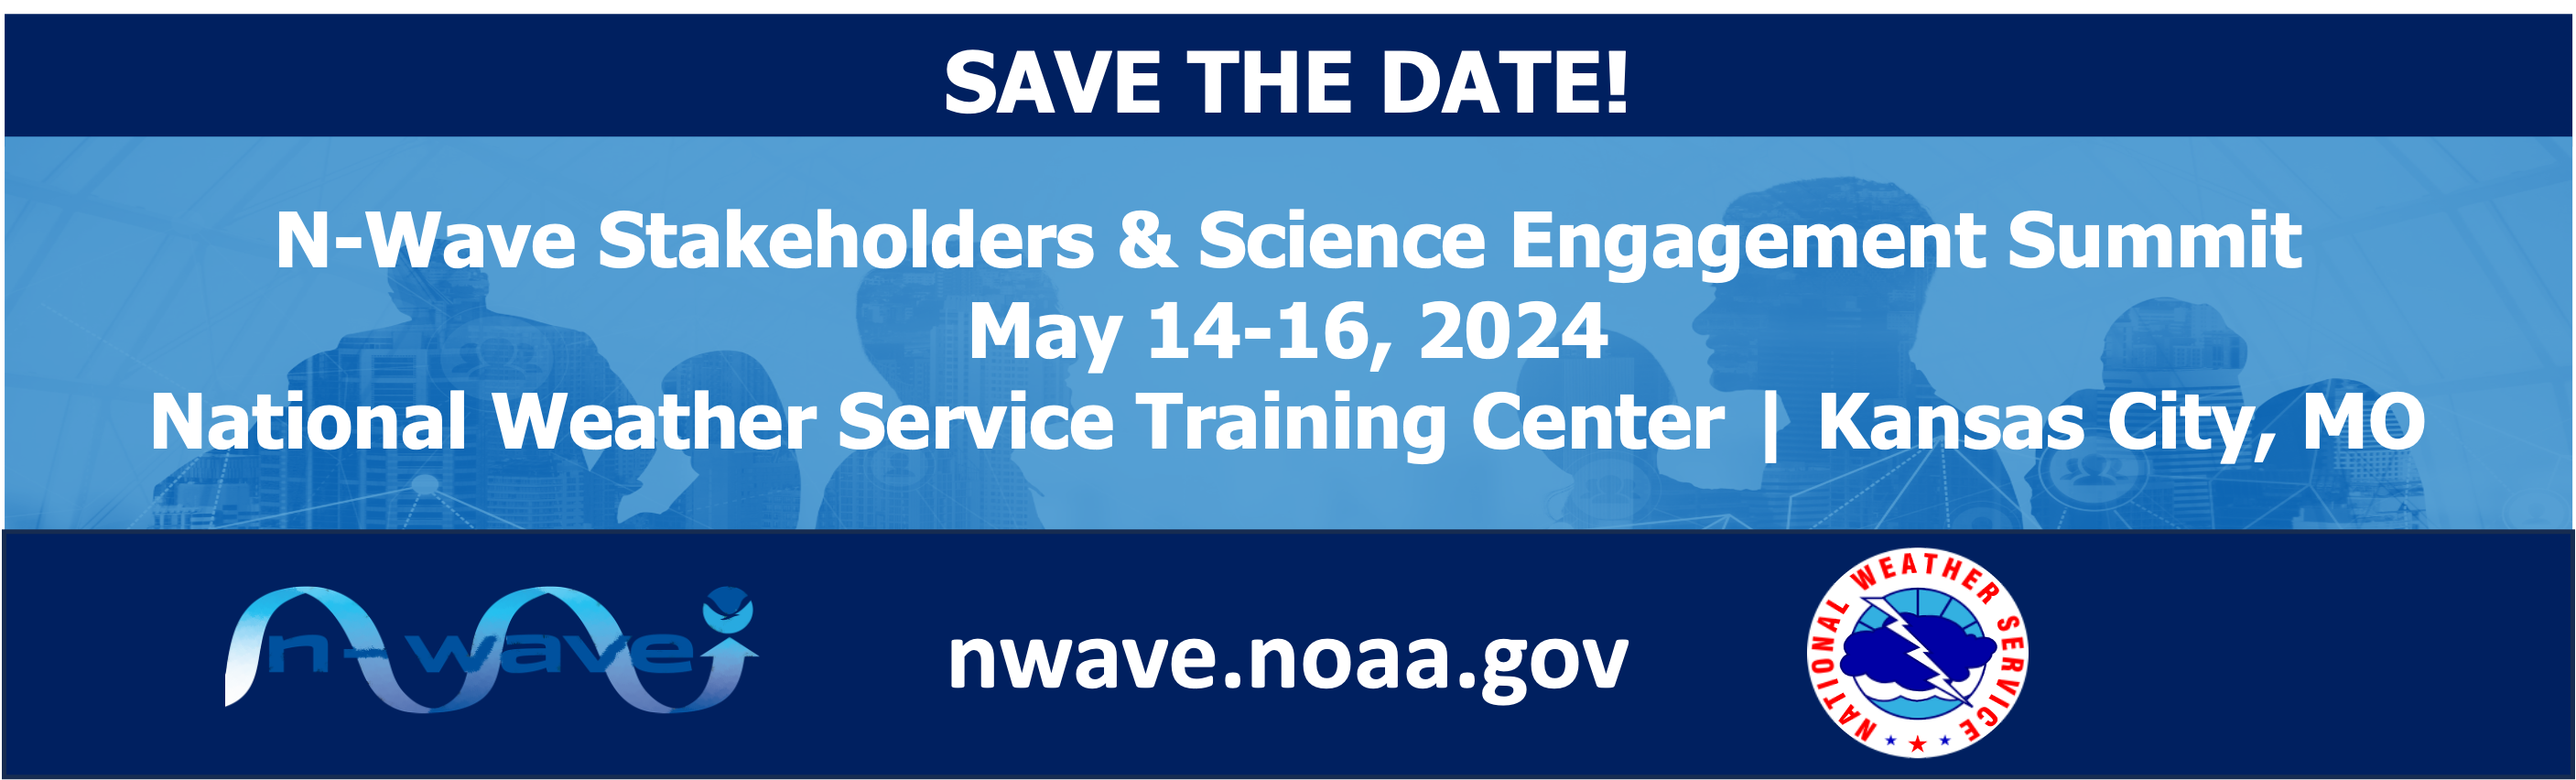 Save the Date, N-Wave Stakeholders and Science Engagemaen Summit, May 14-15, 2024, National Weather Service Training Center, Kansas City, Missouri